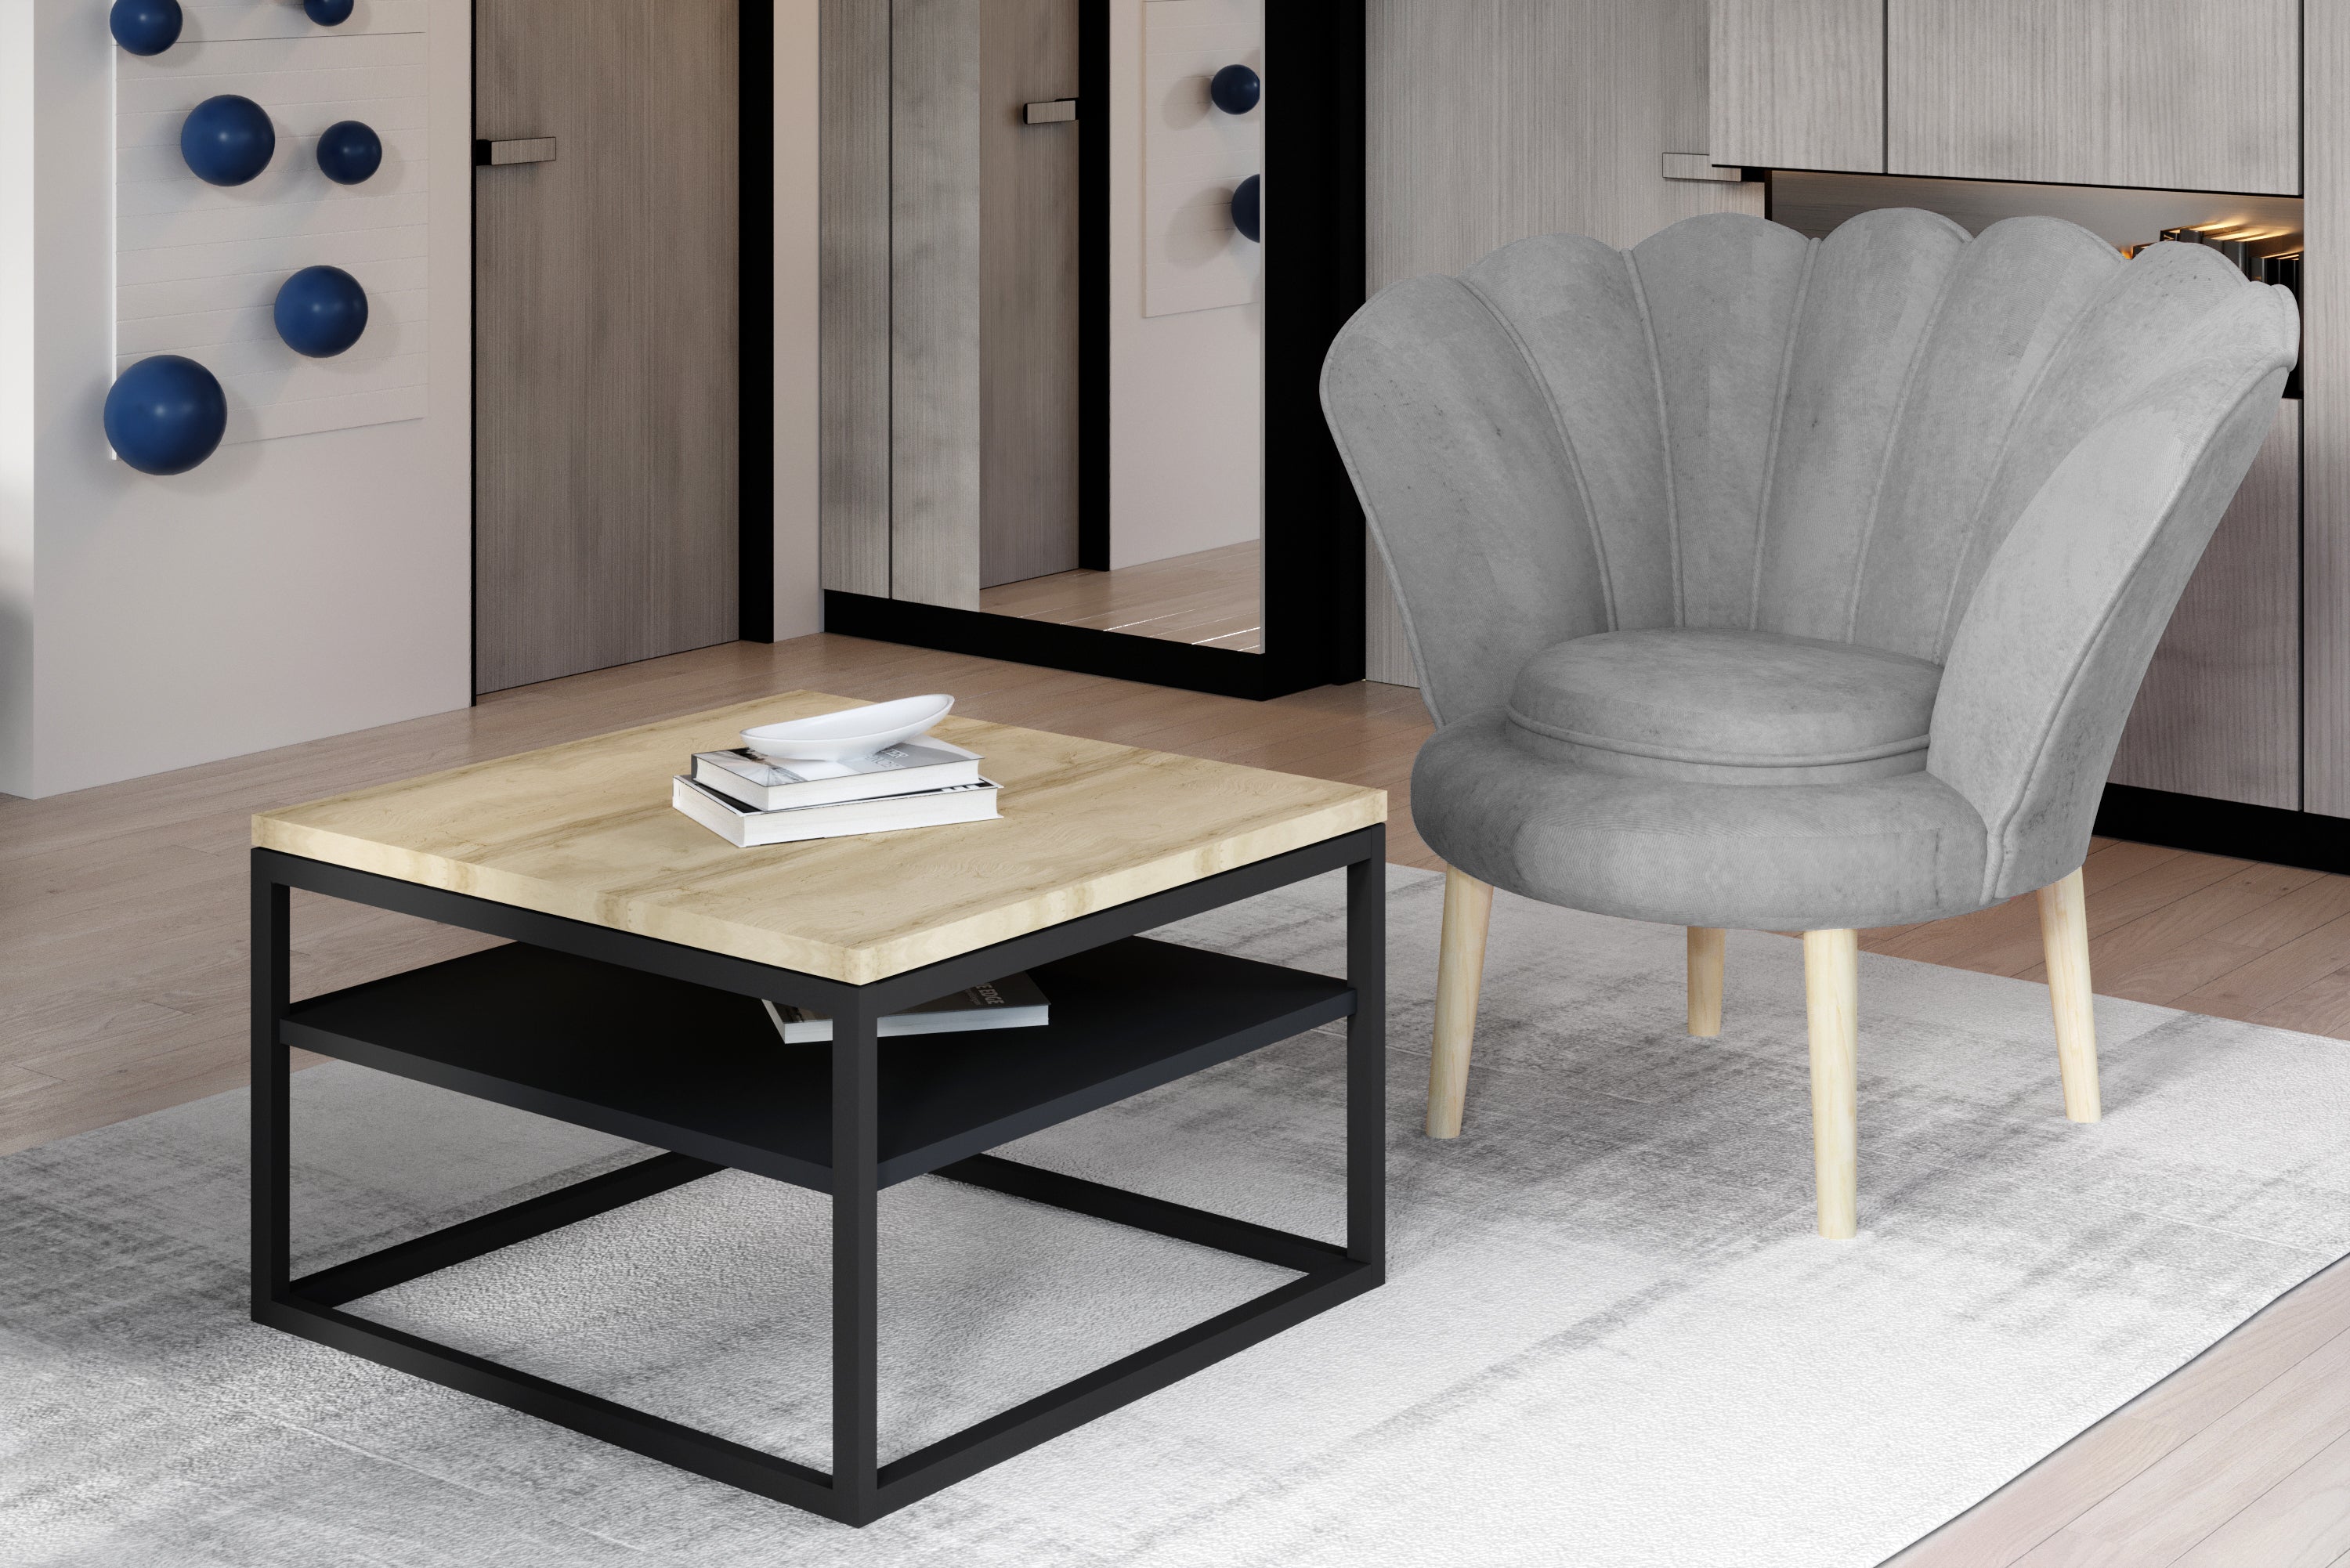 Chair and coffee table set-Lupe Vivien